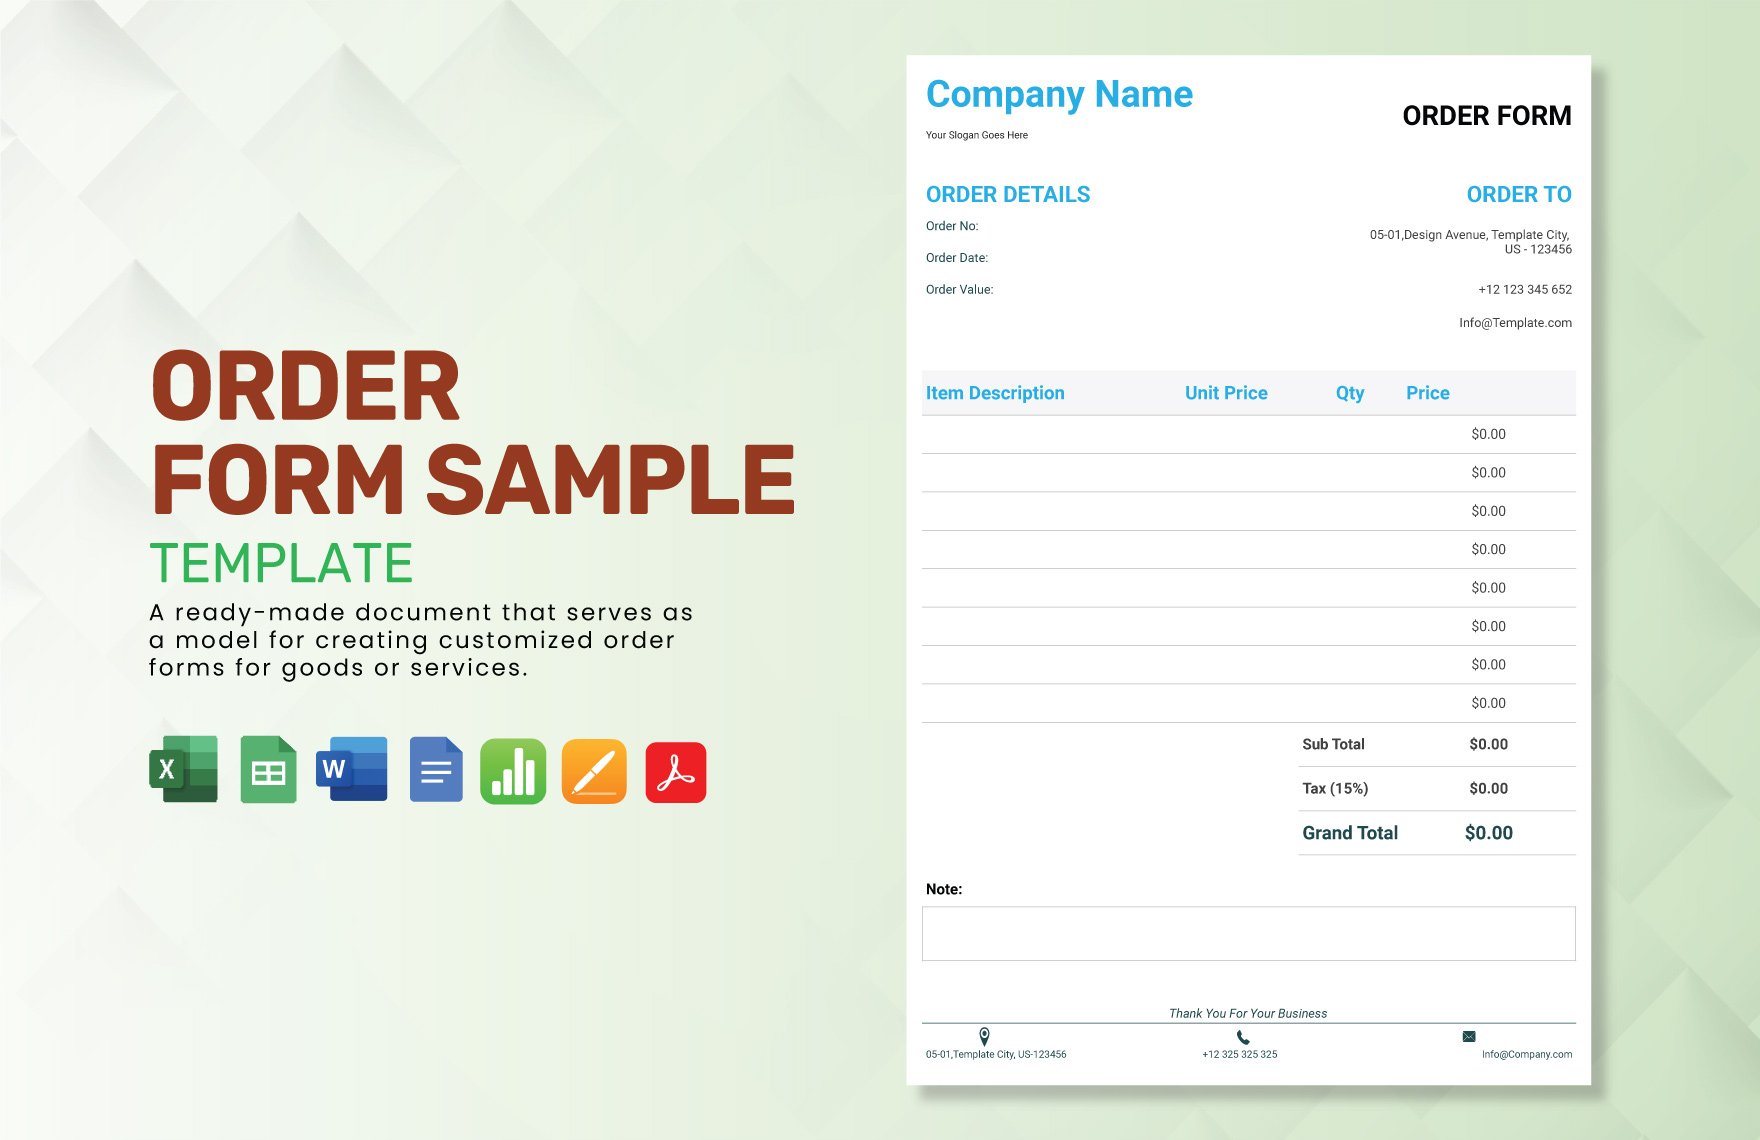 Order Form Sample Template in Word, Google Docs, Excel, PDF, Google Sheets, Apple Pages, Apple Numbers